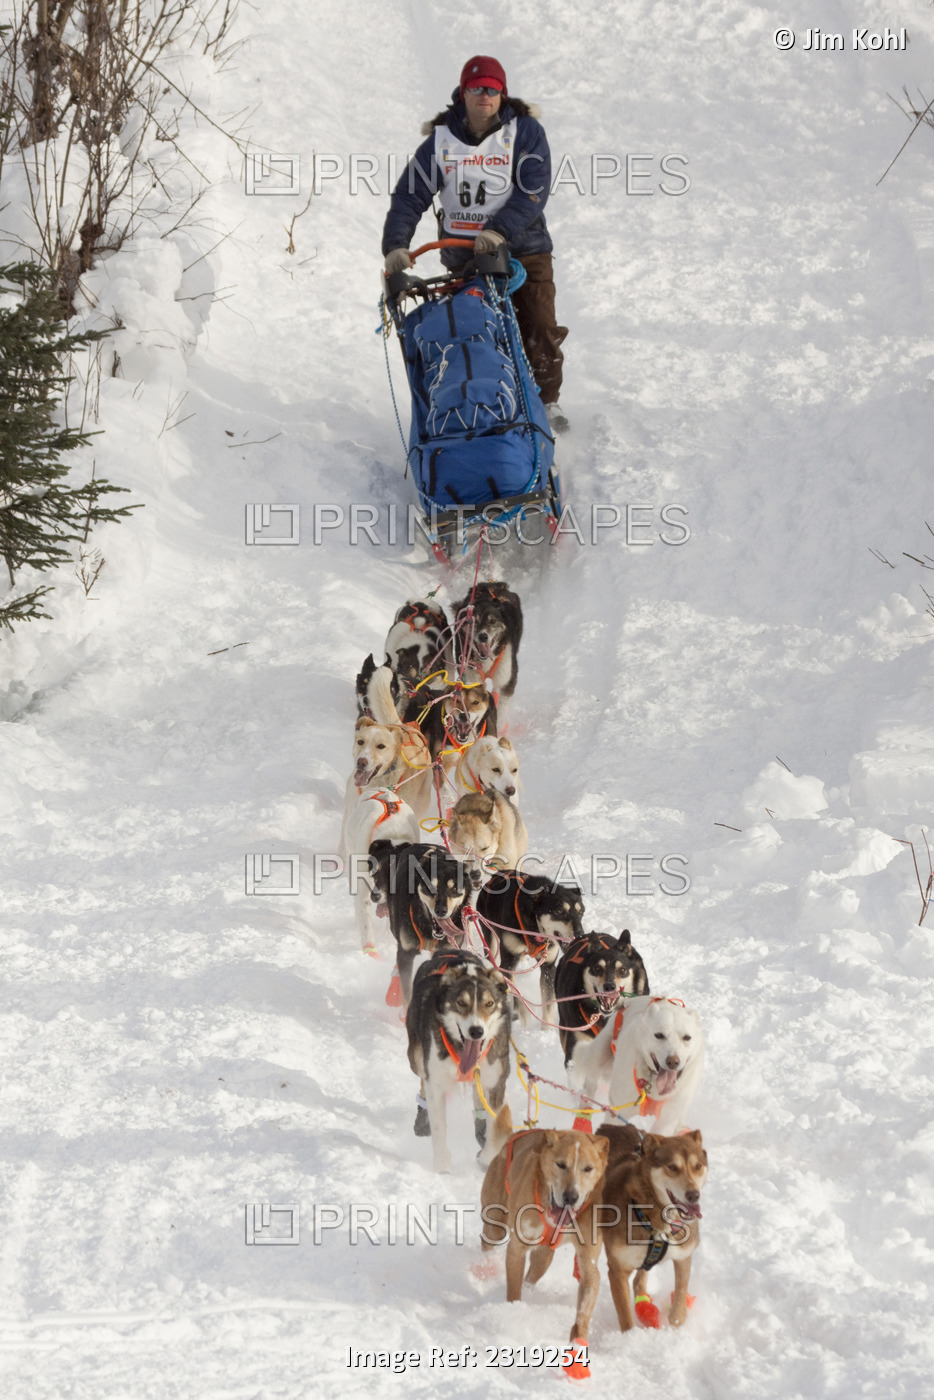 Timothy Hunt At The Restart Of The 2009 Iditarod In Willow Alaska